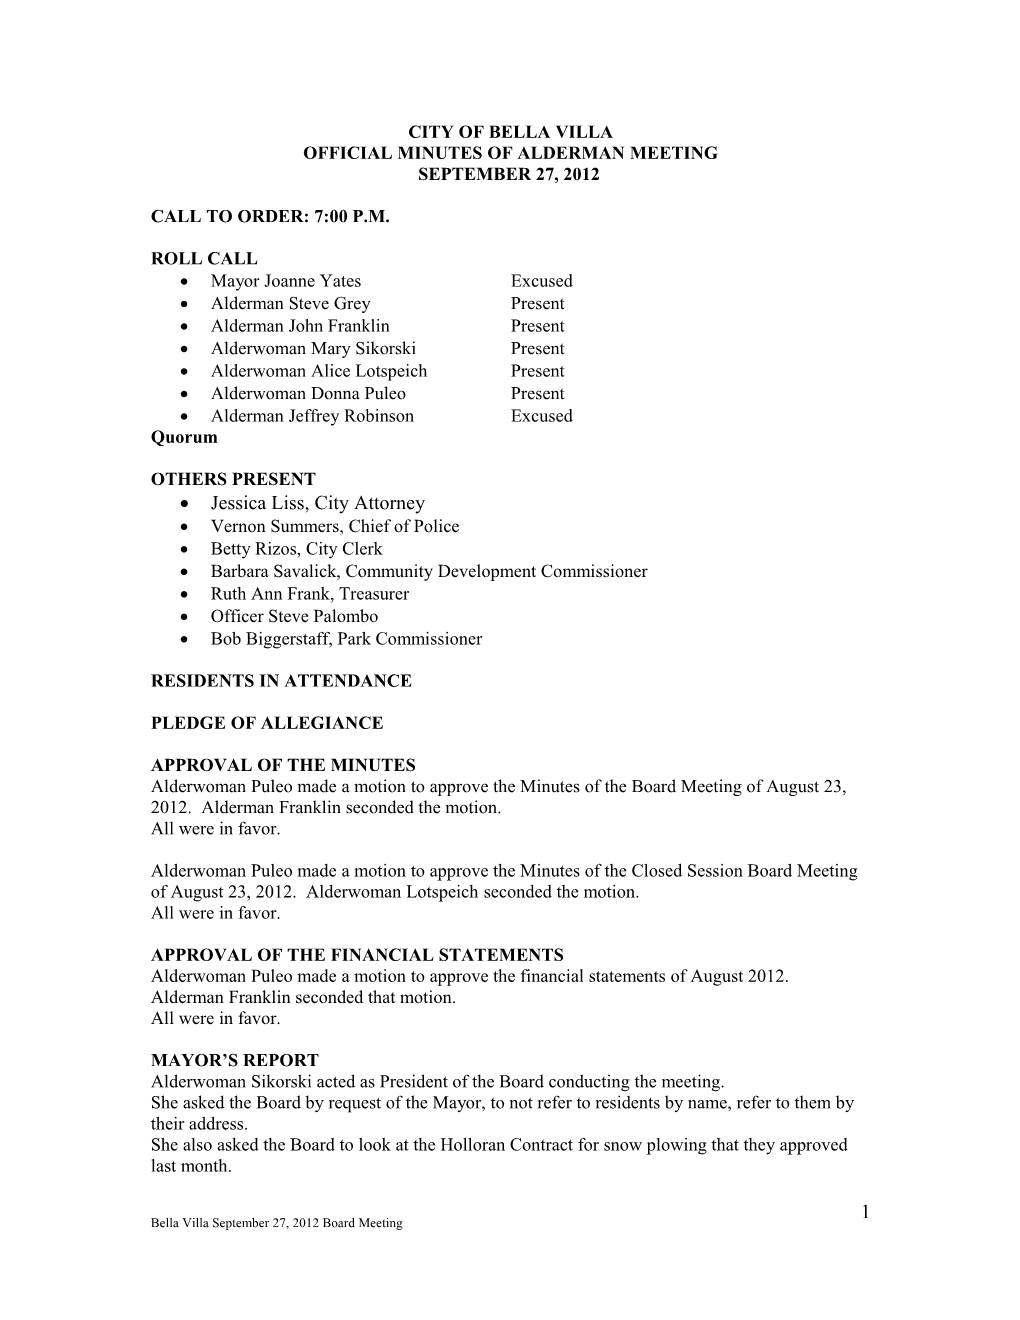 Official Minutes of Alderman Meeting